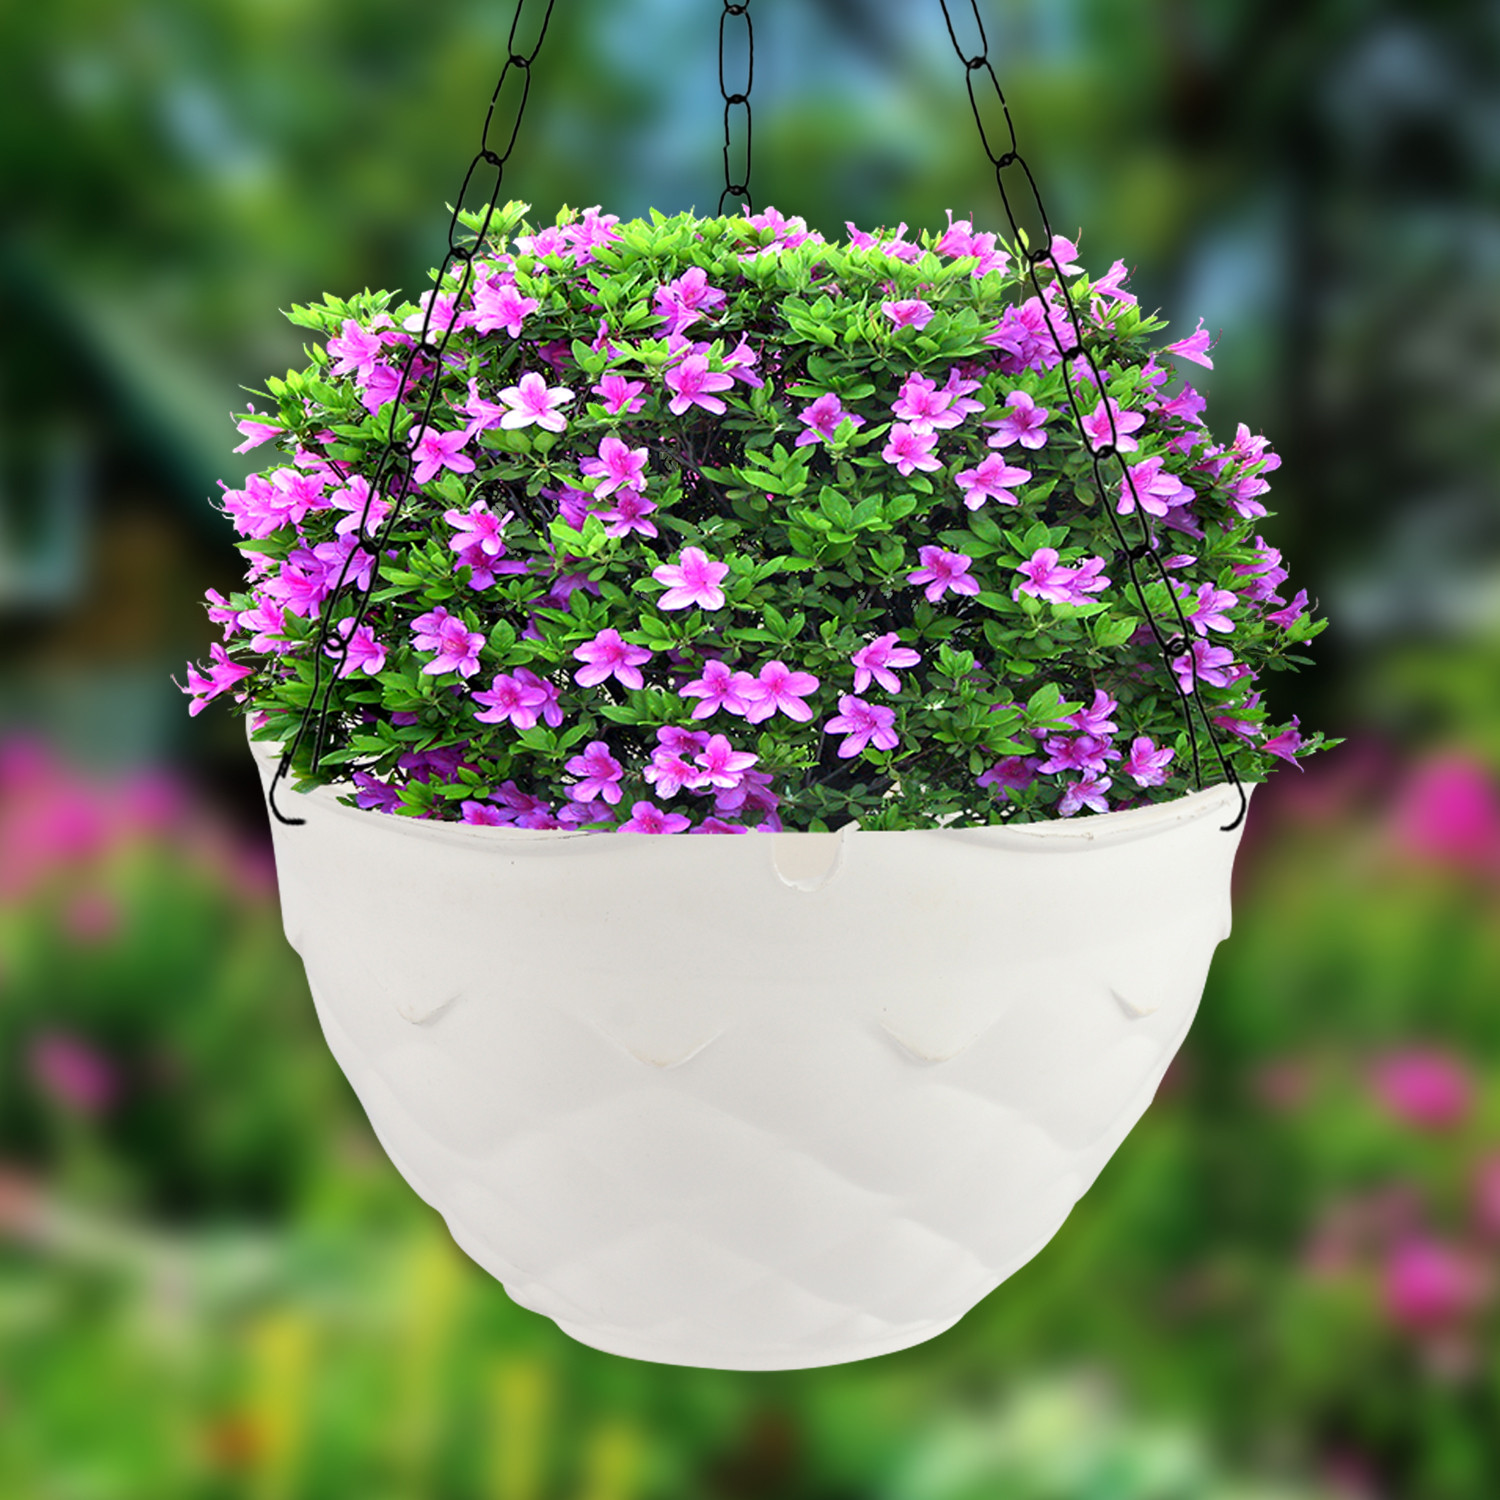 Kuber Industries Diamond Flower Pot|Durable Plastic Hanging Basket Flower Planter with Chain for Home|Garden|Balcony|Pack of 3 (Multicolor)